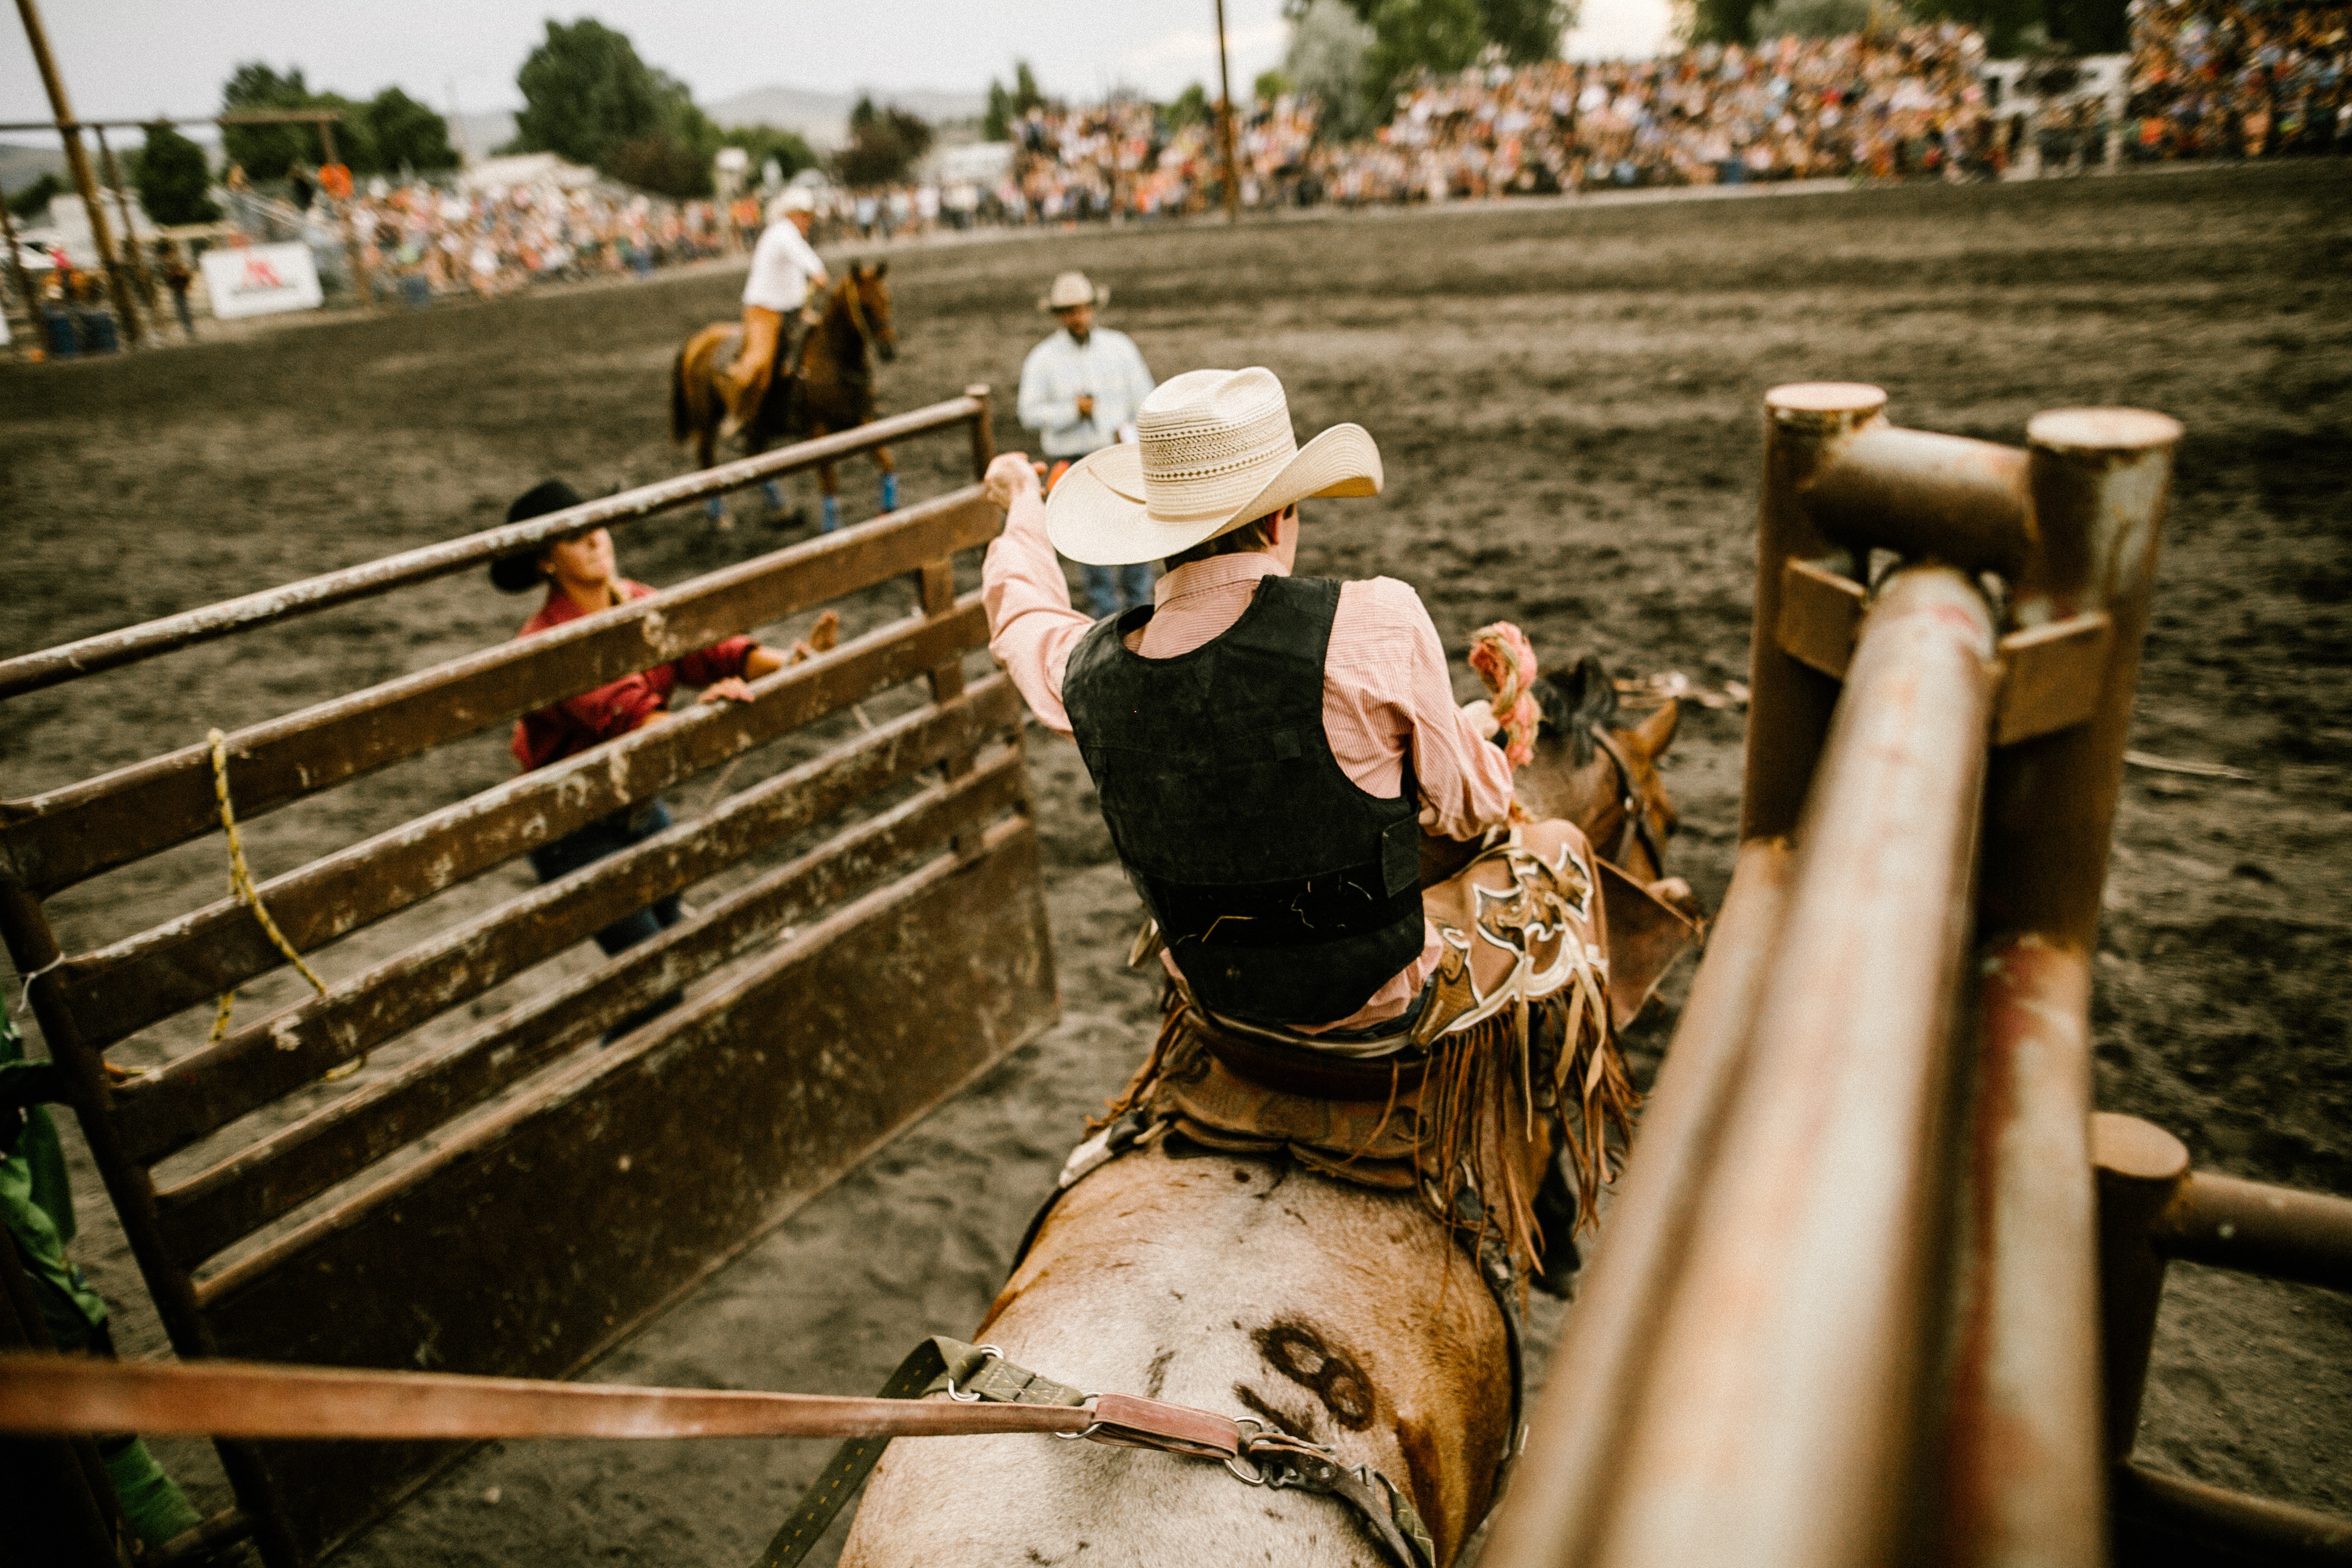 cowboy competes in a bucking bronco competition at a rodeo